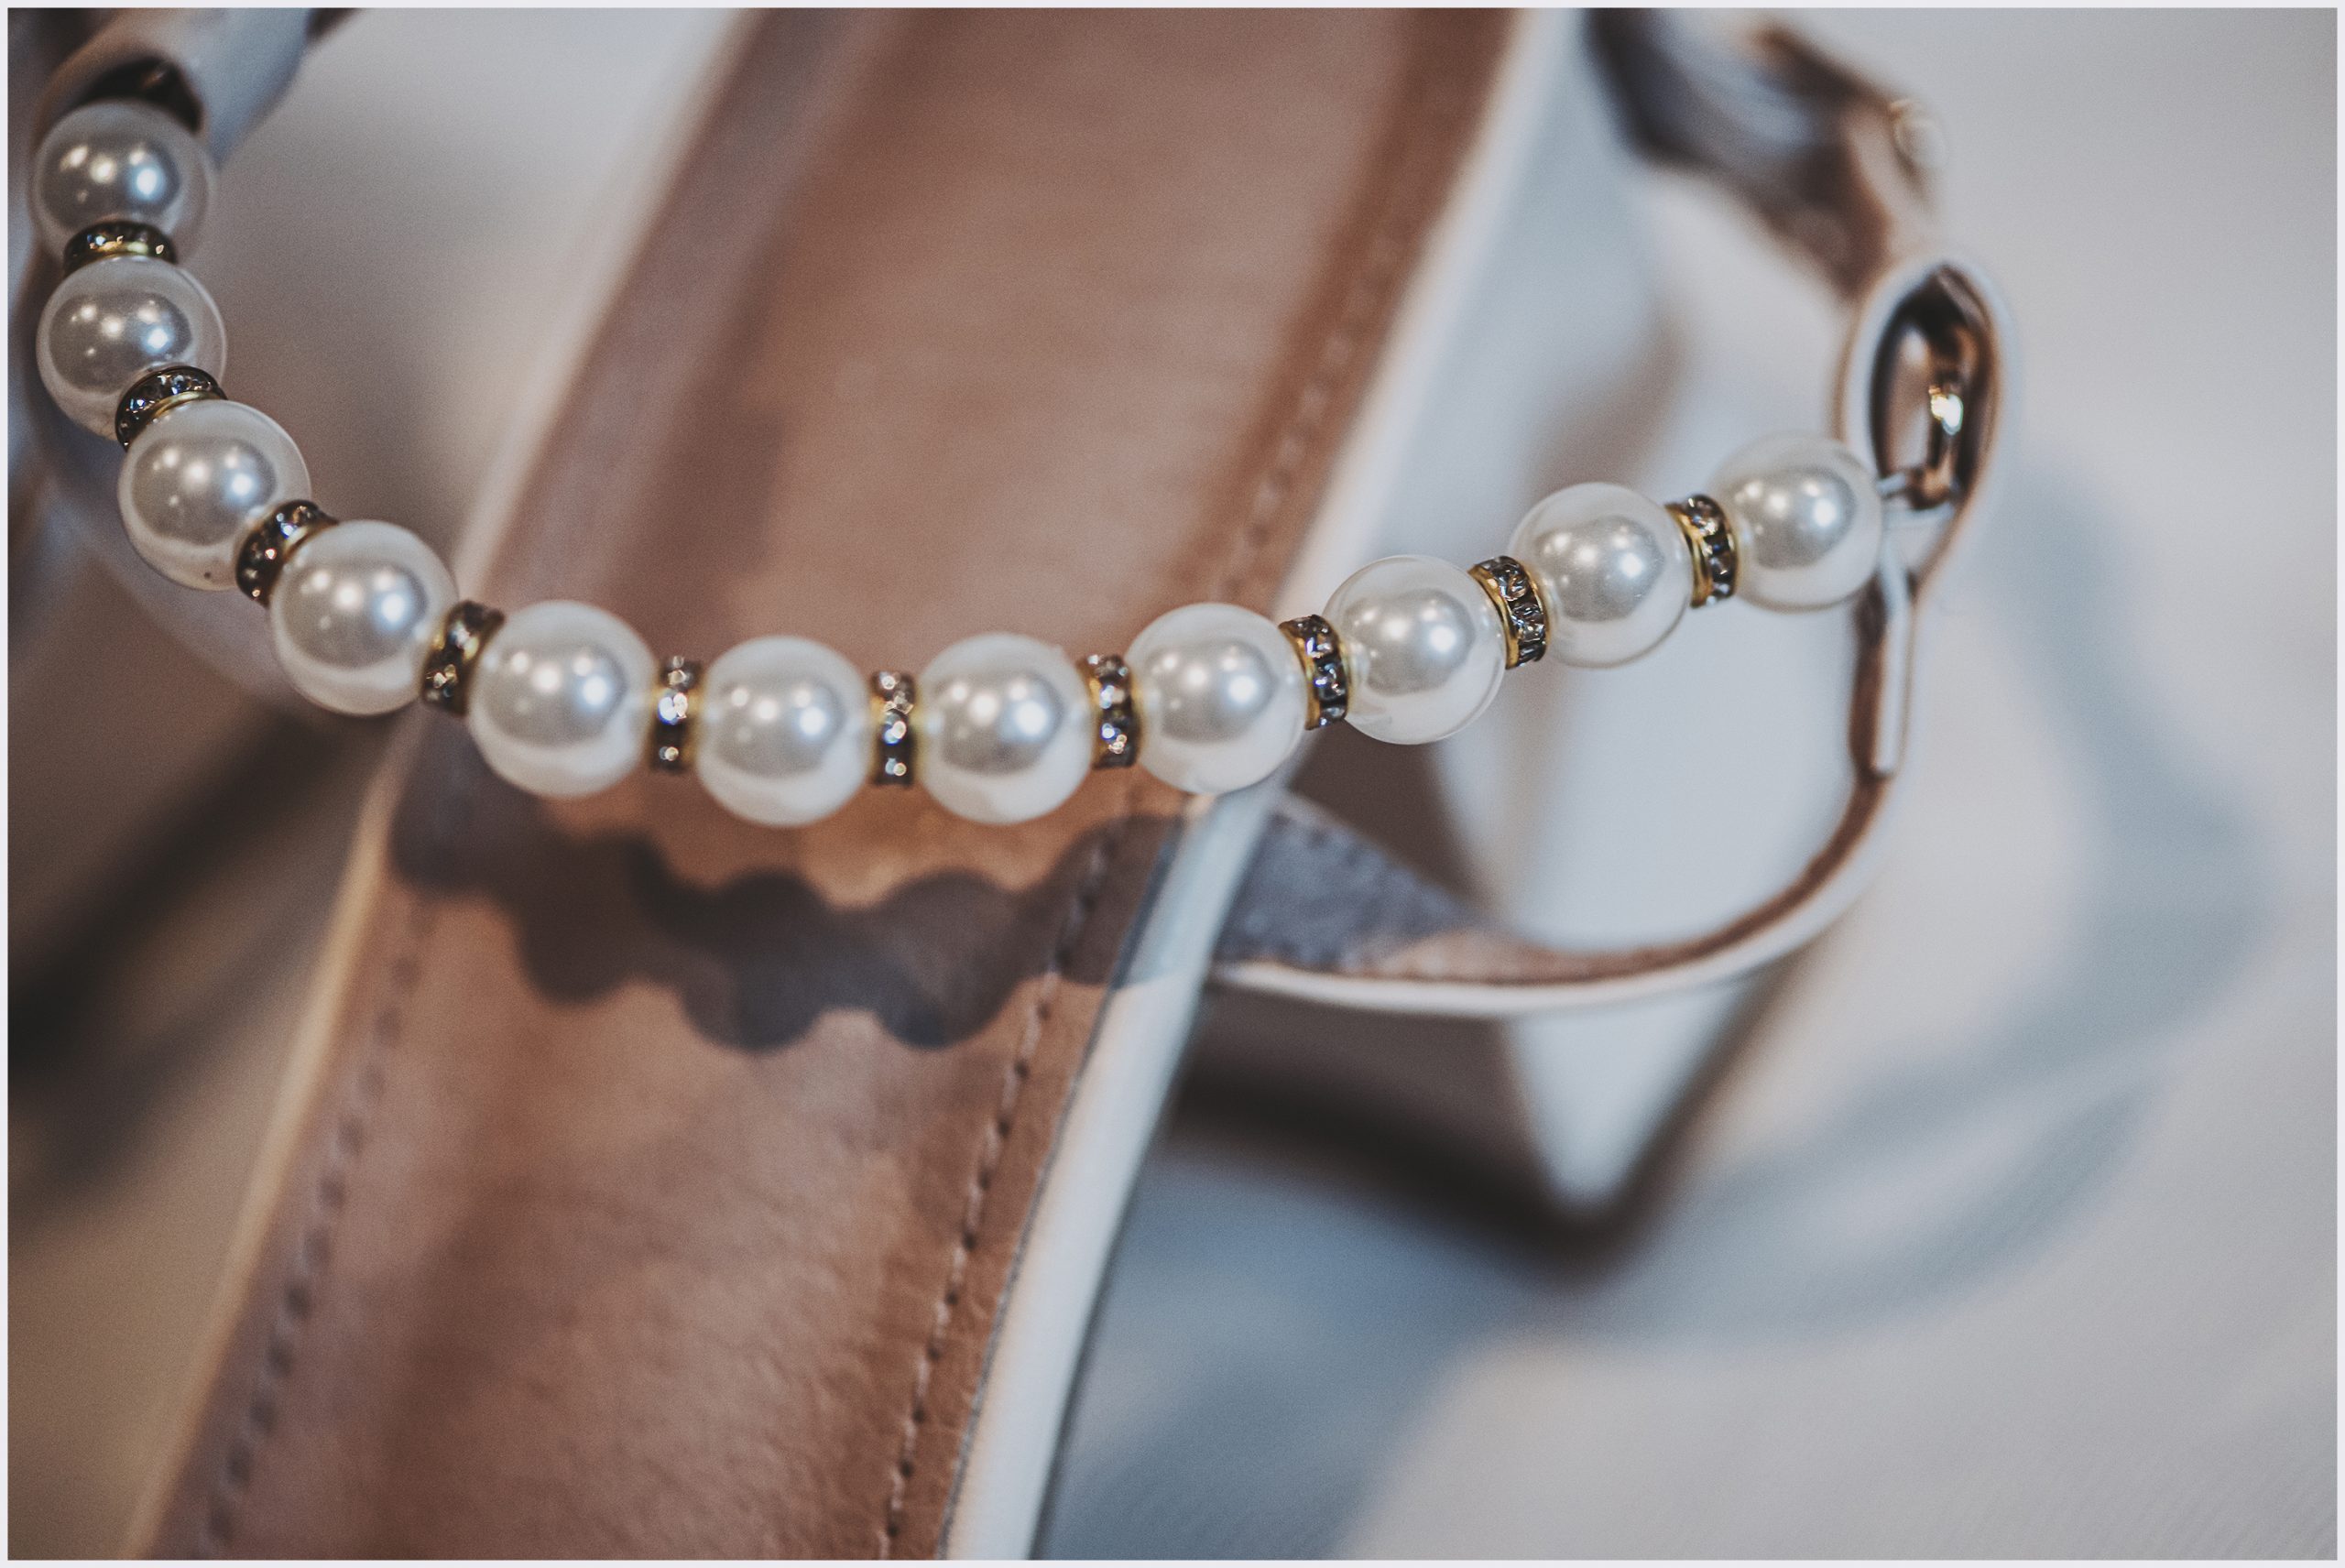 A close up shot of the beeded detail of a bride's wedding shoe